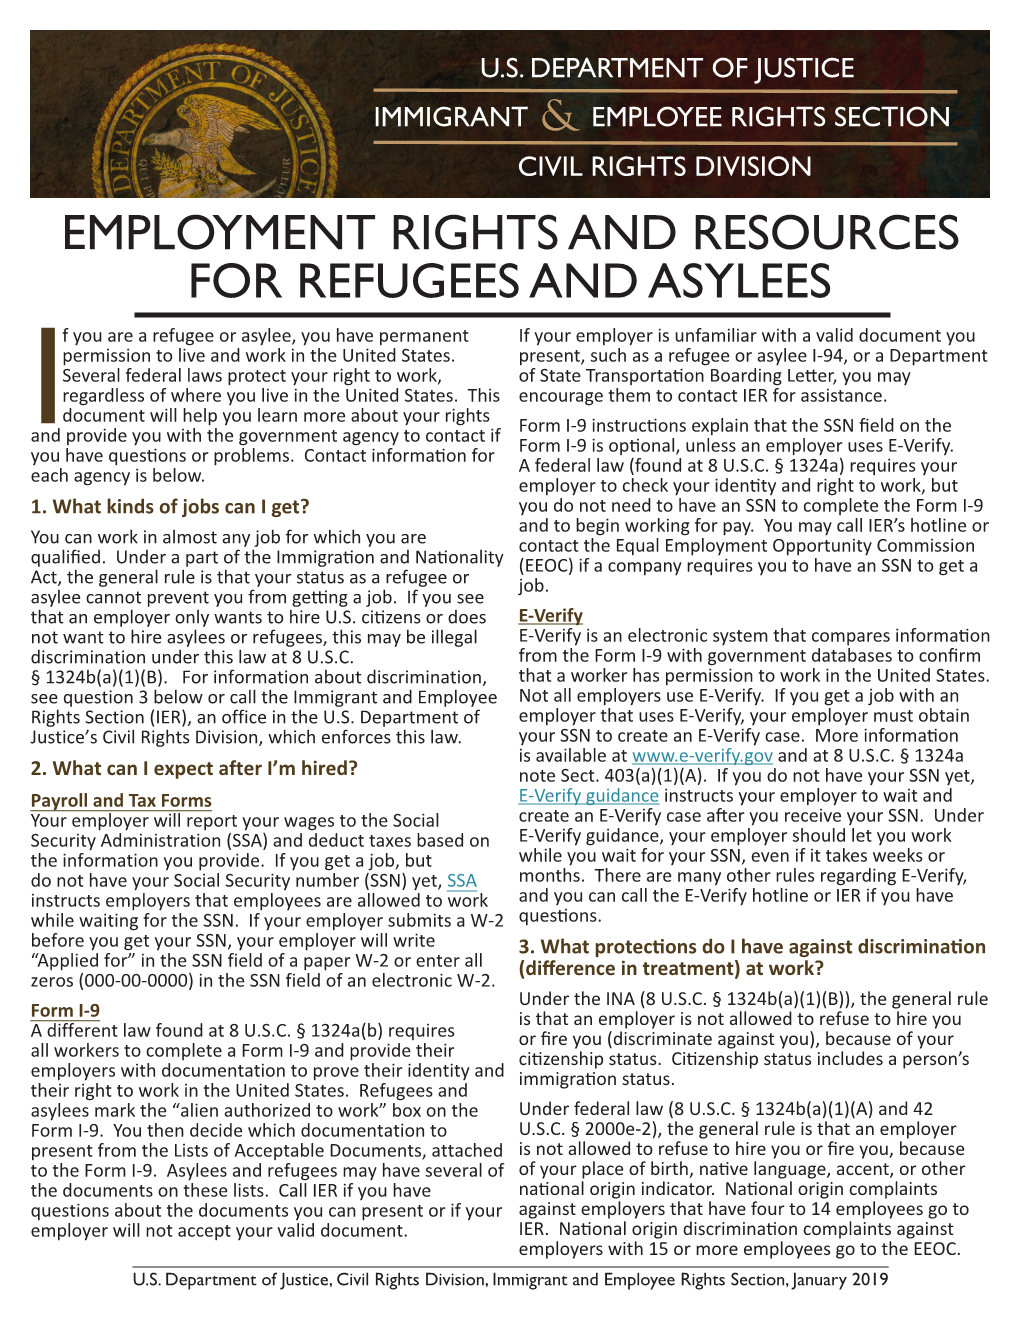 IER Employment Rights and Resources for Refugees and Asylees 2 14 19